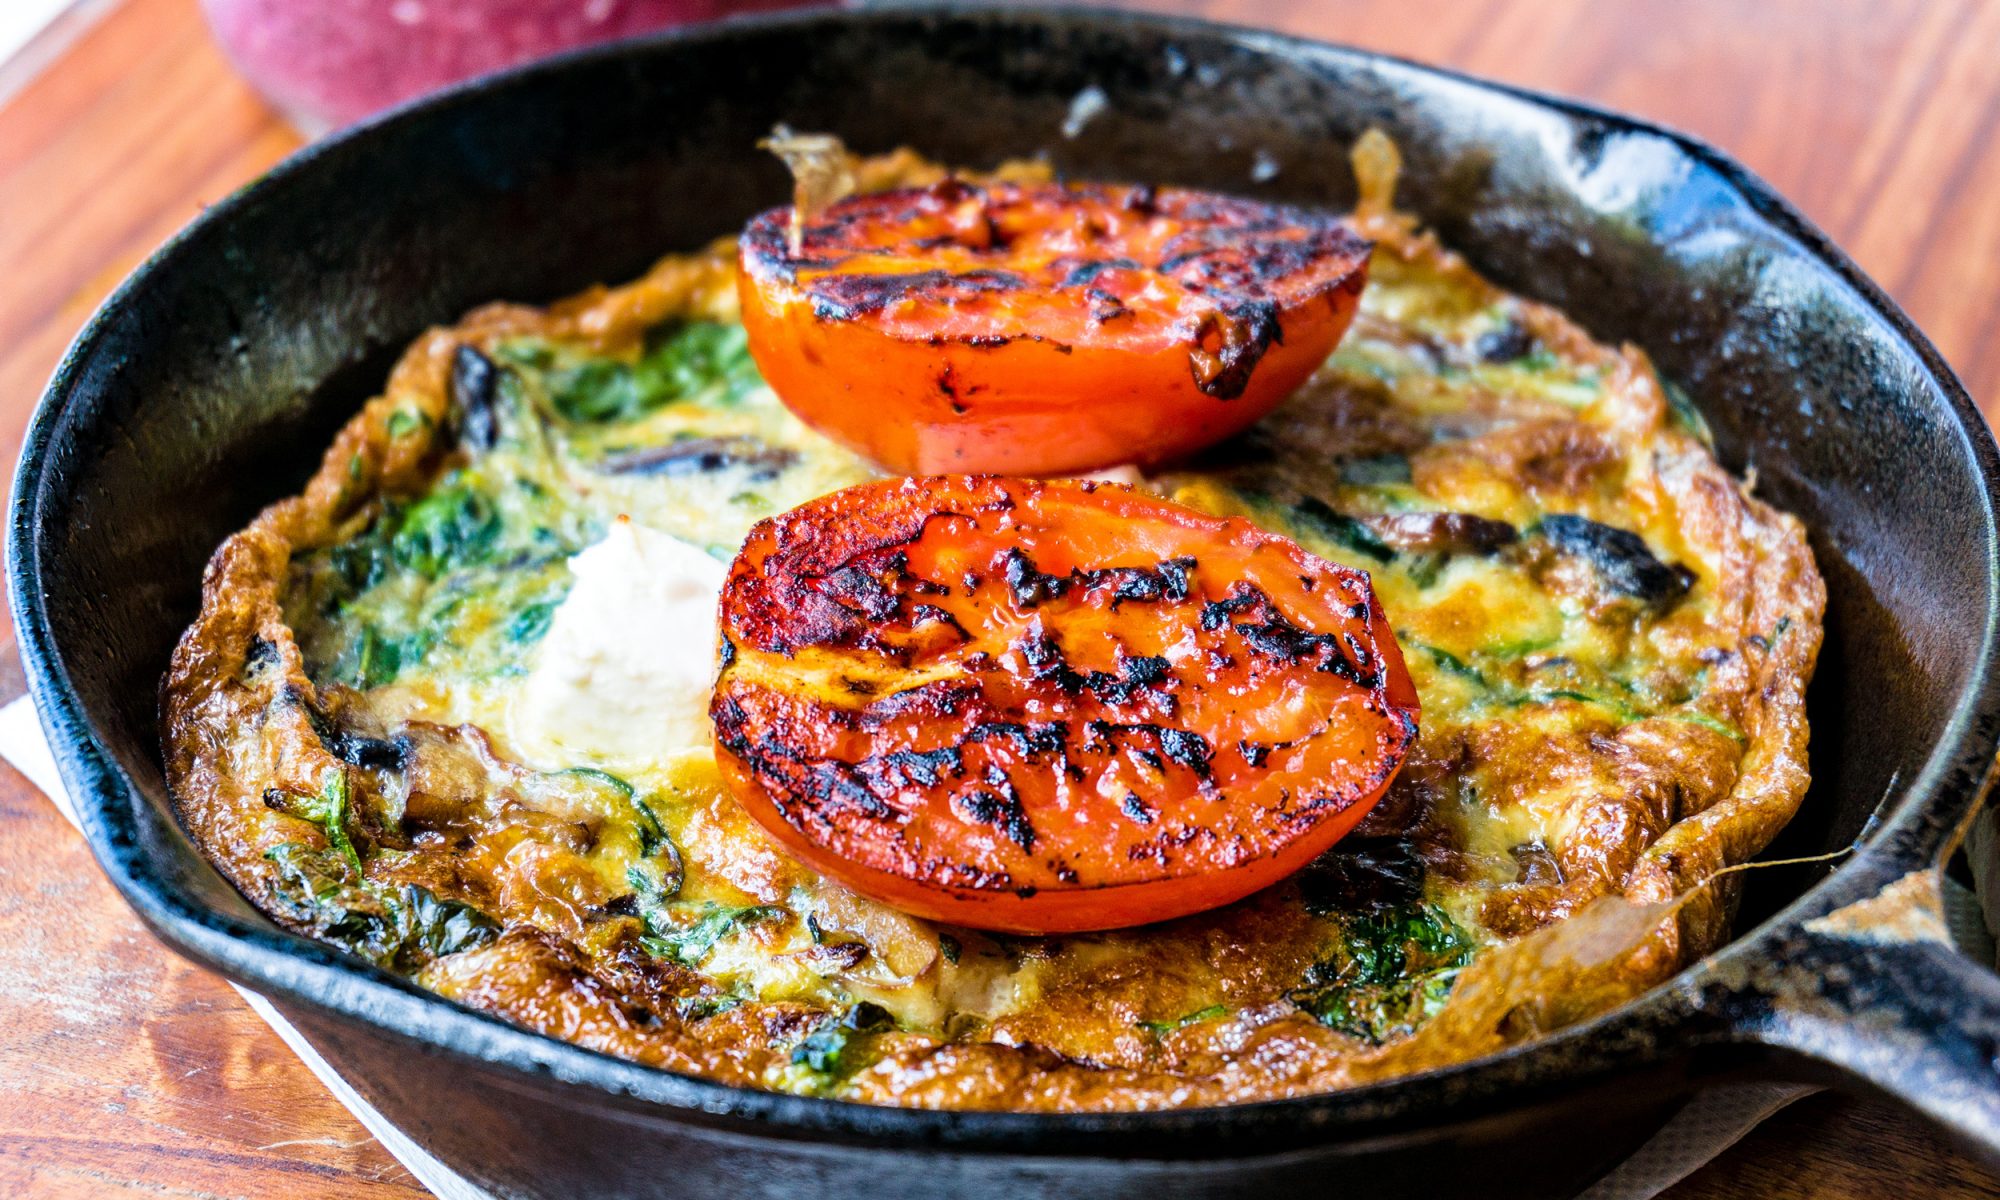 EC: 7 Healthy One-Pot Breakfasts to Make Ahead and Eat All Week Long